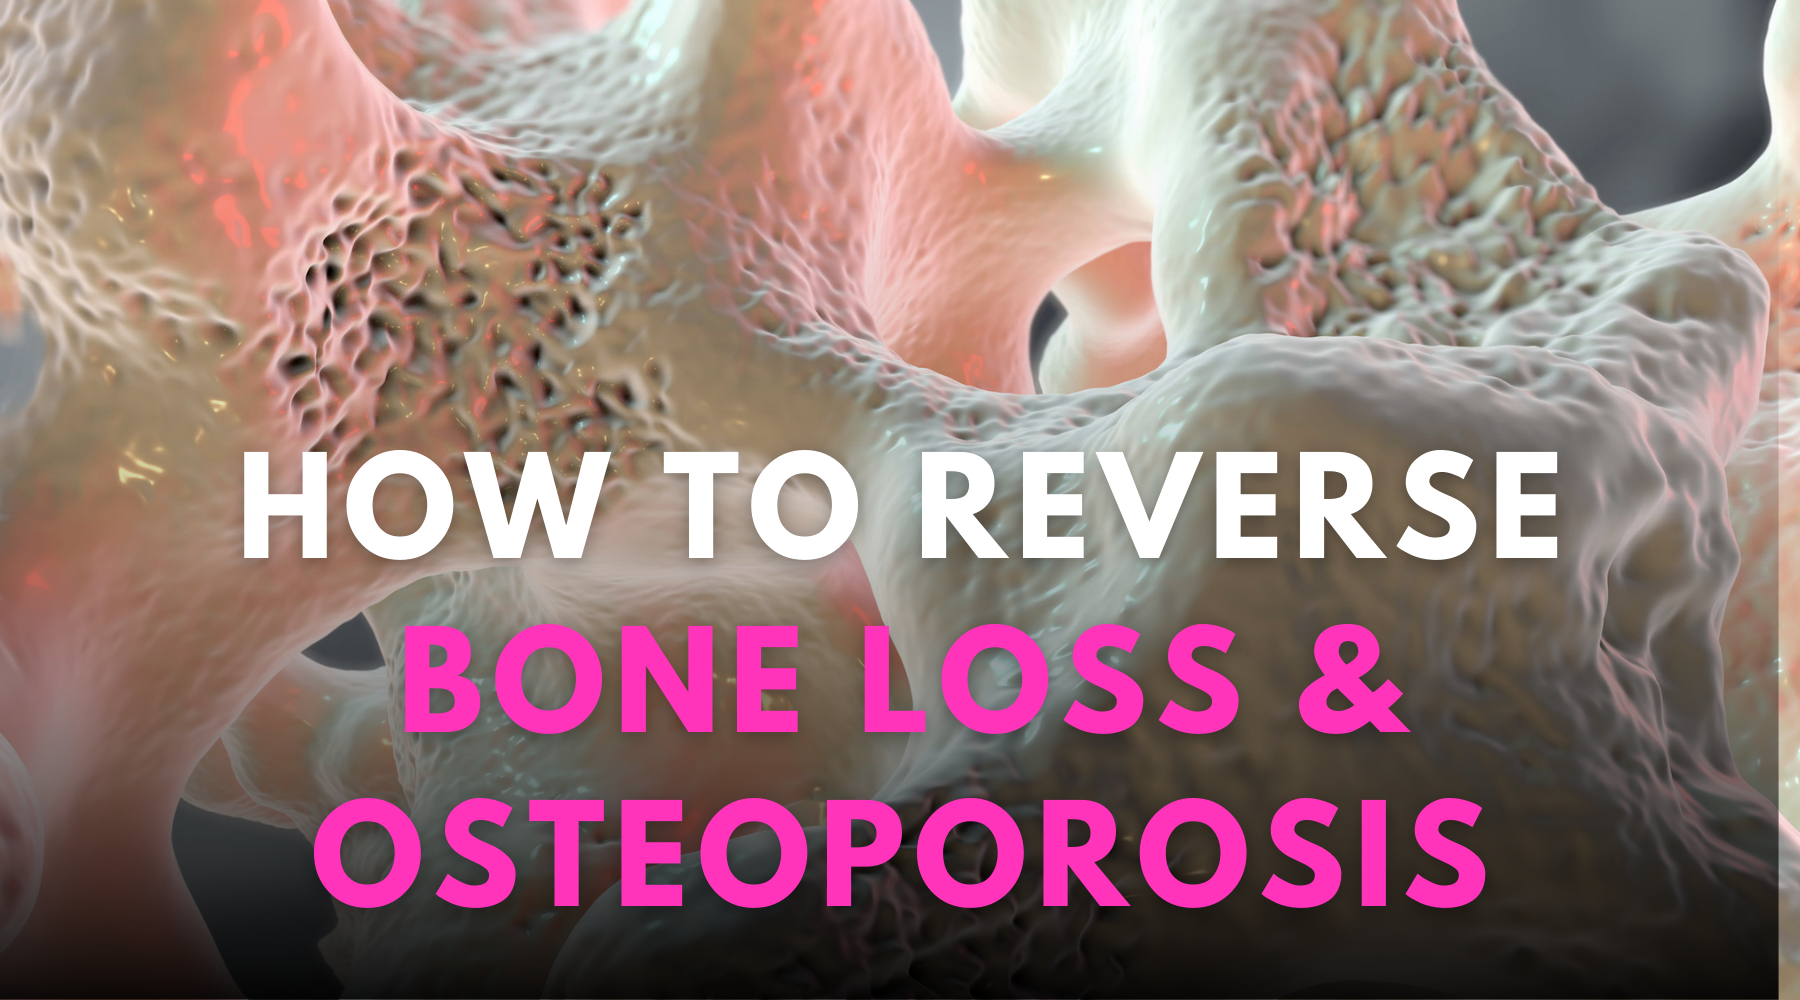 Understanding osteoporosis and the benefits of plant-based calcium